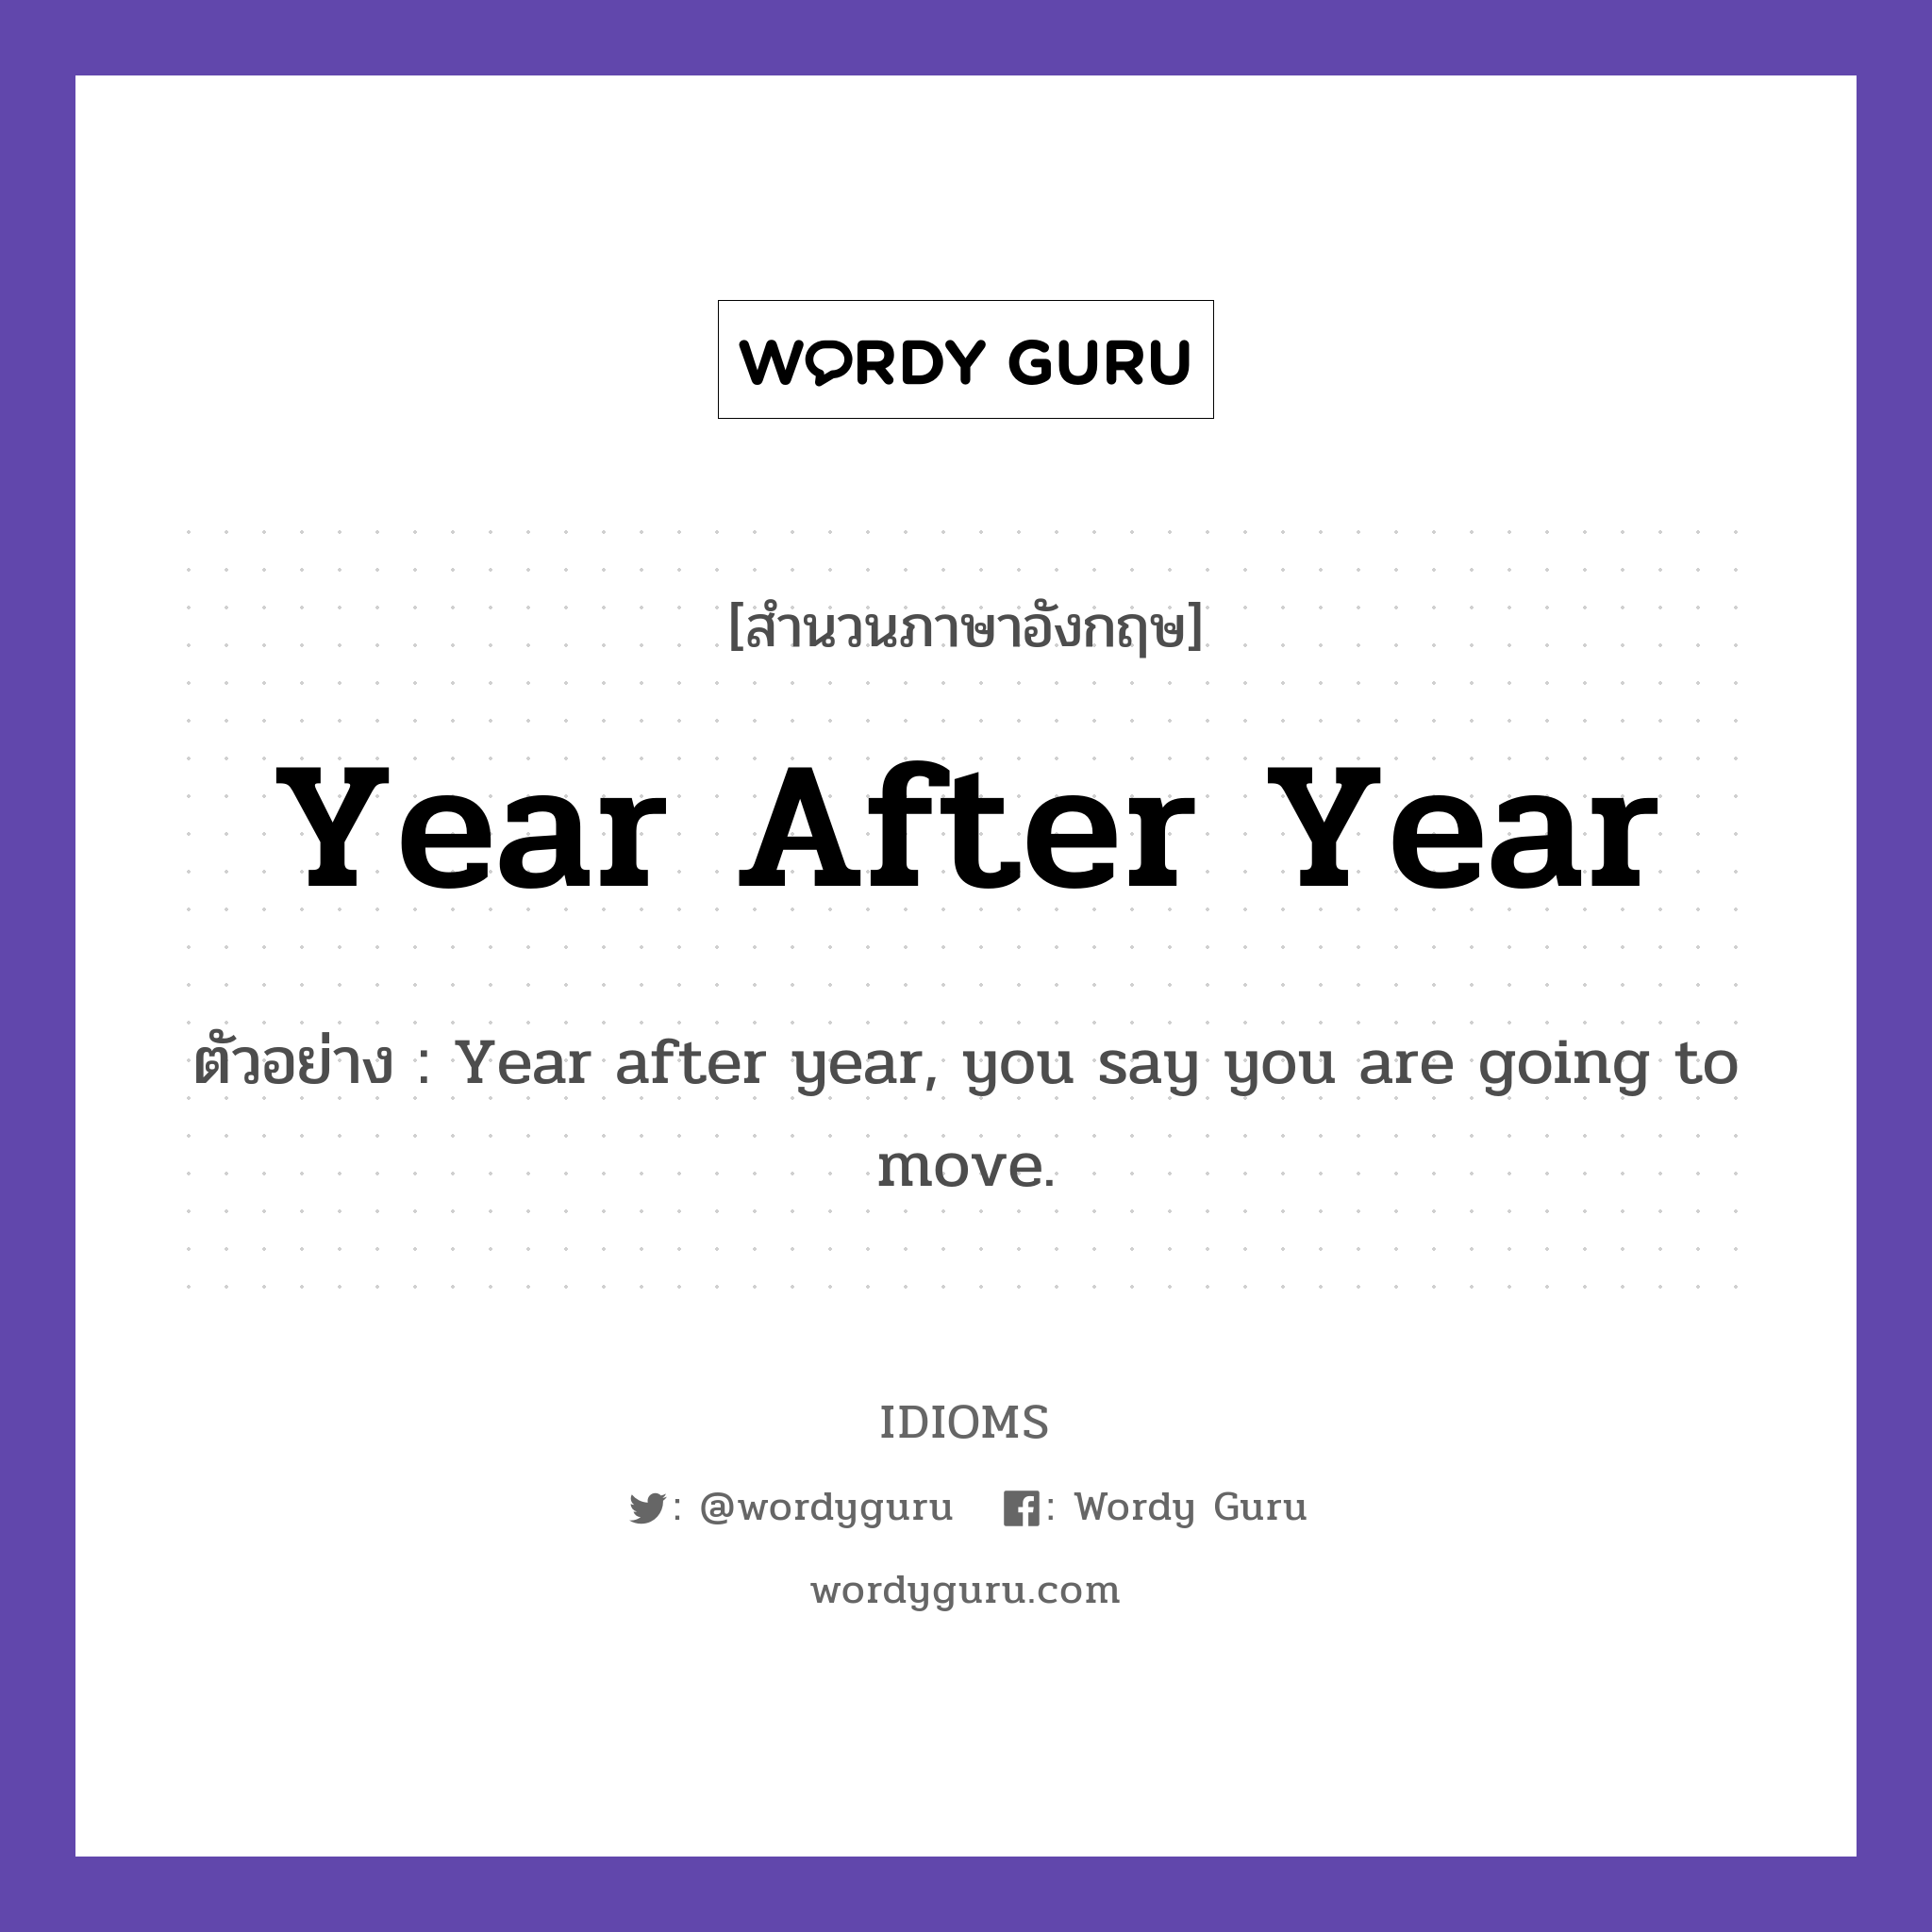 Year After Year แปลว่า?, สำนวนภาษาอังกฤษ Year After Year ตัวอย่าง Year after year, you say you are going to move.